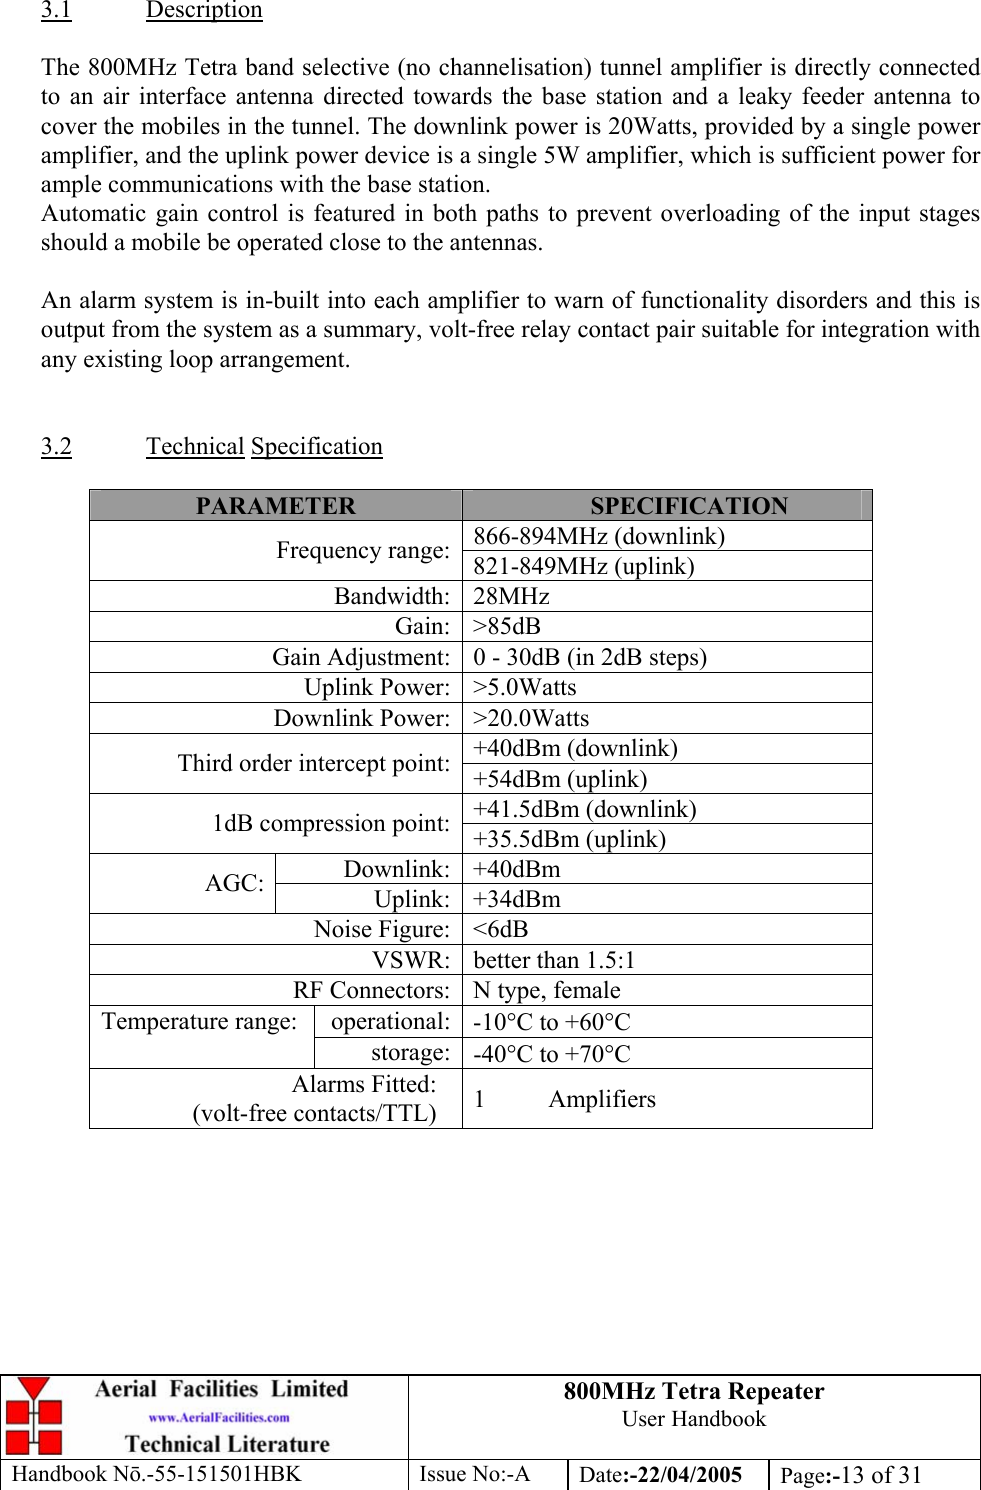 800MHz Tetra Repeater User Handbook Handbook Nō.-55-151501HBK Issue No:-A Date:-22/04/2005  Page:-13 of 31   3.1 Description  The 800MHz Tetra band selective (no channelisation) tunnel amplifier is directly connected to an air interface antenna directed towards the base station and a leaky feeder antenna to cover the mobiles in the tunnel. The downlink power is 20Watts, provided by a single power amplifier, and the uplink power device is a single 5W amplifier, which is sufficient power for ample communications with the base station. Automatic gain control is featured in both paths to prevent overloading of the input stages should a mobile be operated close to the antennas.  An alarm system is in-built into each amplifier to warn of functionality disorders and this is output from the system as a summary, volt-free relay contact pair suitable for integration with any existing loop arrangement.   3.2 Technical Specification  PARAMETER  SPECIFICATION 866-894MHz (downlink) Frequency range: 821-849MHz (uplink) Bandwidth: 28MHz Gain: &gt;85dB Gain Adjustment: 0 - 30dB (in 2dB steps) Uplink Power: &gt;5.0Watts Downlink Power: &gt;20.0Watts +40dBm (downlink) Third order intercept point: +54dBm (uplink) +41.5dBm (downlink) 1dB compression point: +35.5dBm (uplink) Downlink: +40dBm AGC:  Uplink: +34dBm Noise Figure: &lt;6dB VSWR: better than 1.5:1 RF Connectors: N type, female operational: -10°C to +60°C Temperature range:  storage: -40°C to +70°C Alarms Fitted: (volt-free contacts/TTL)  1 Amplifiers   